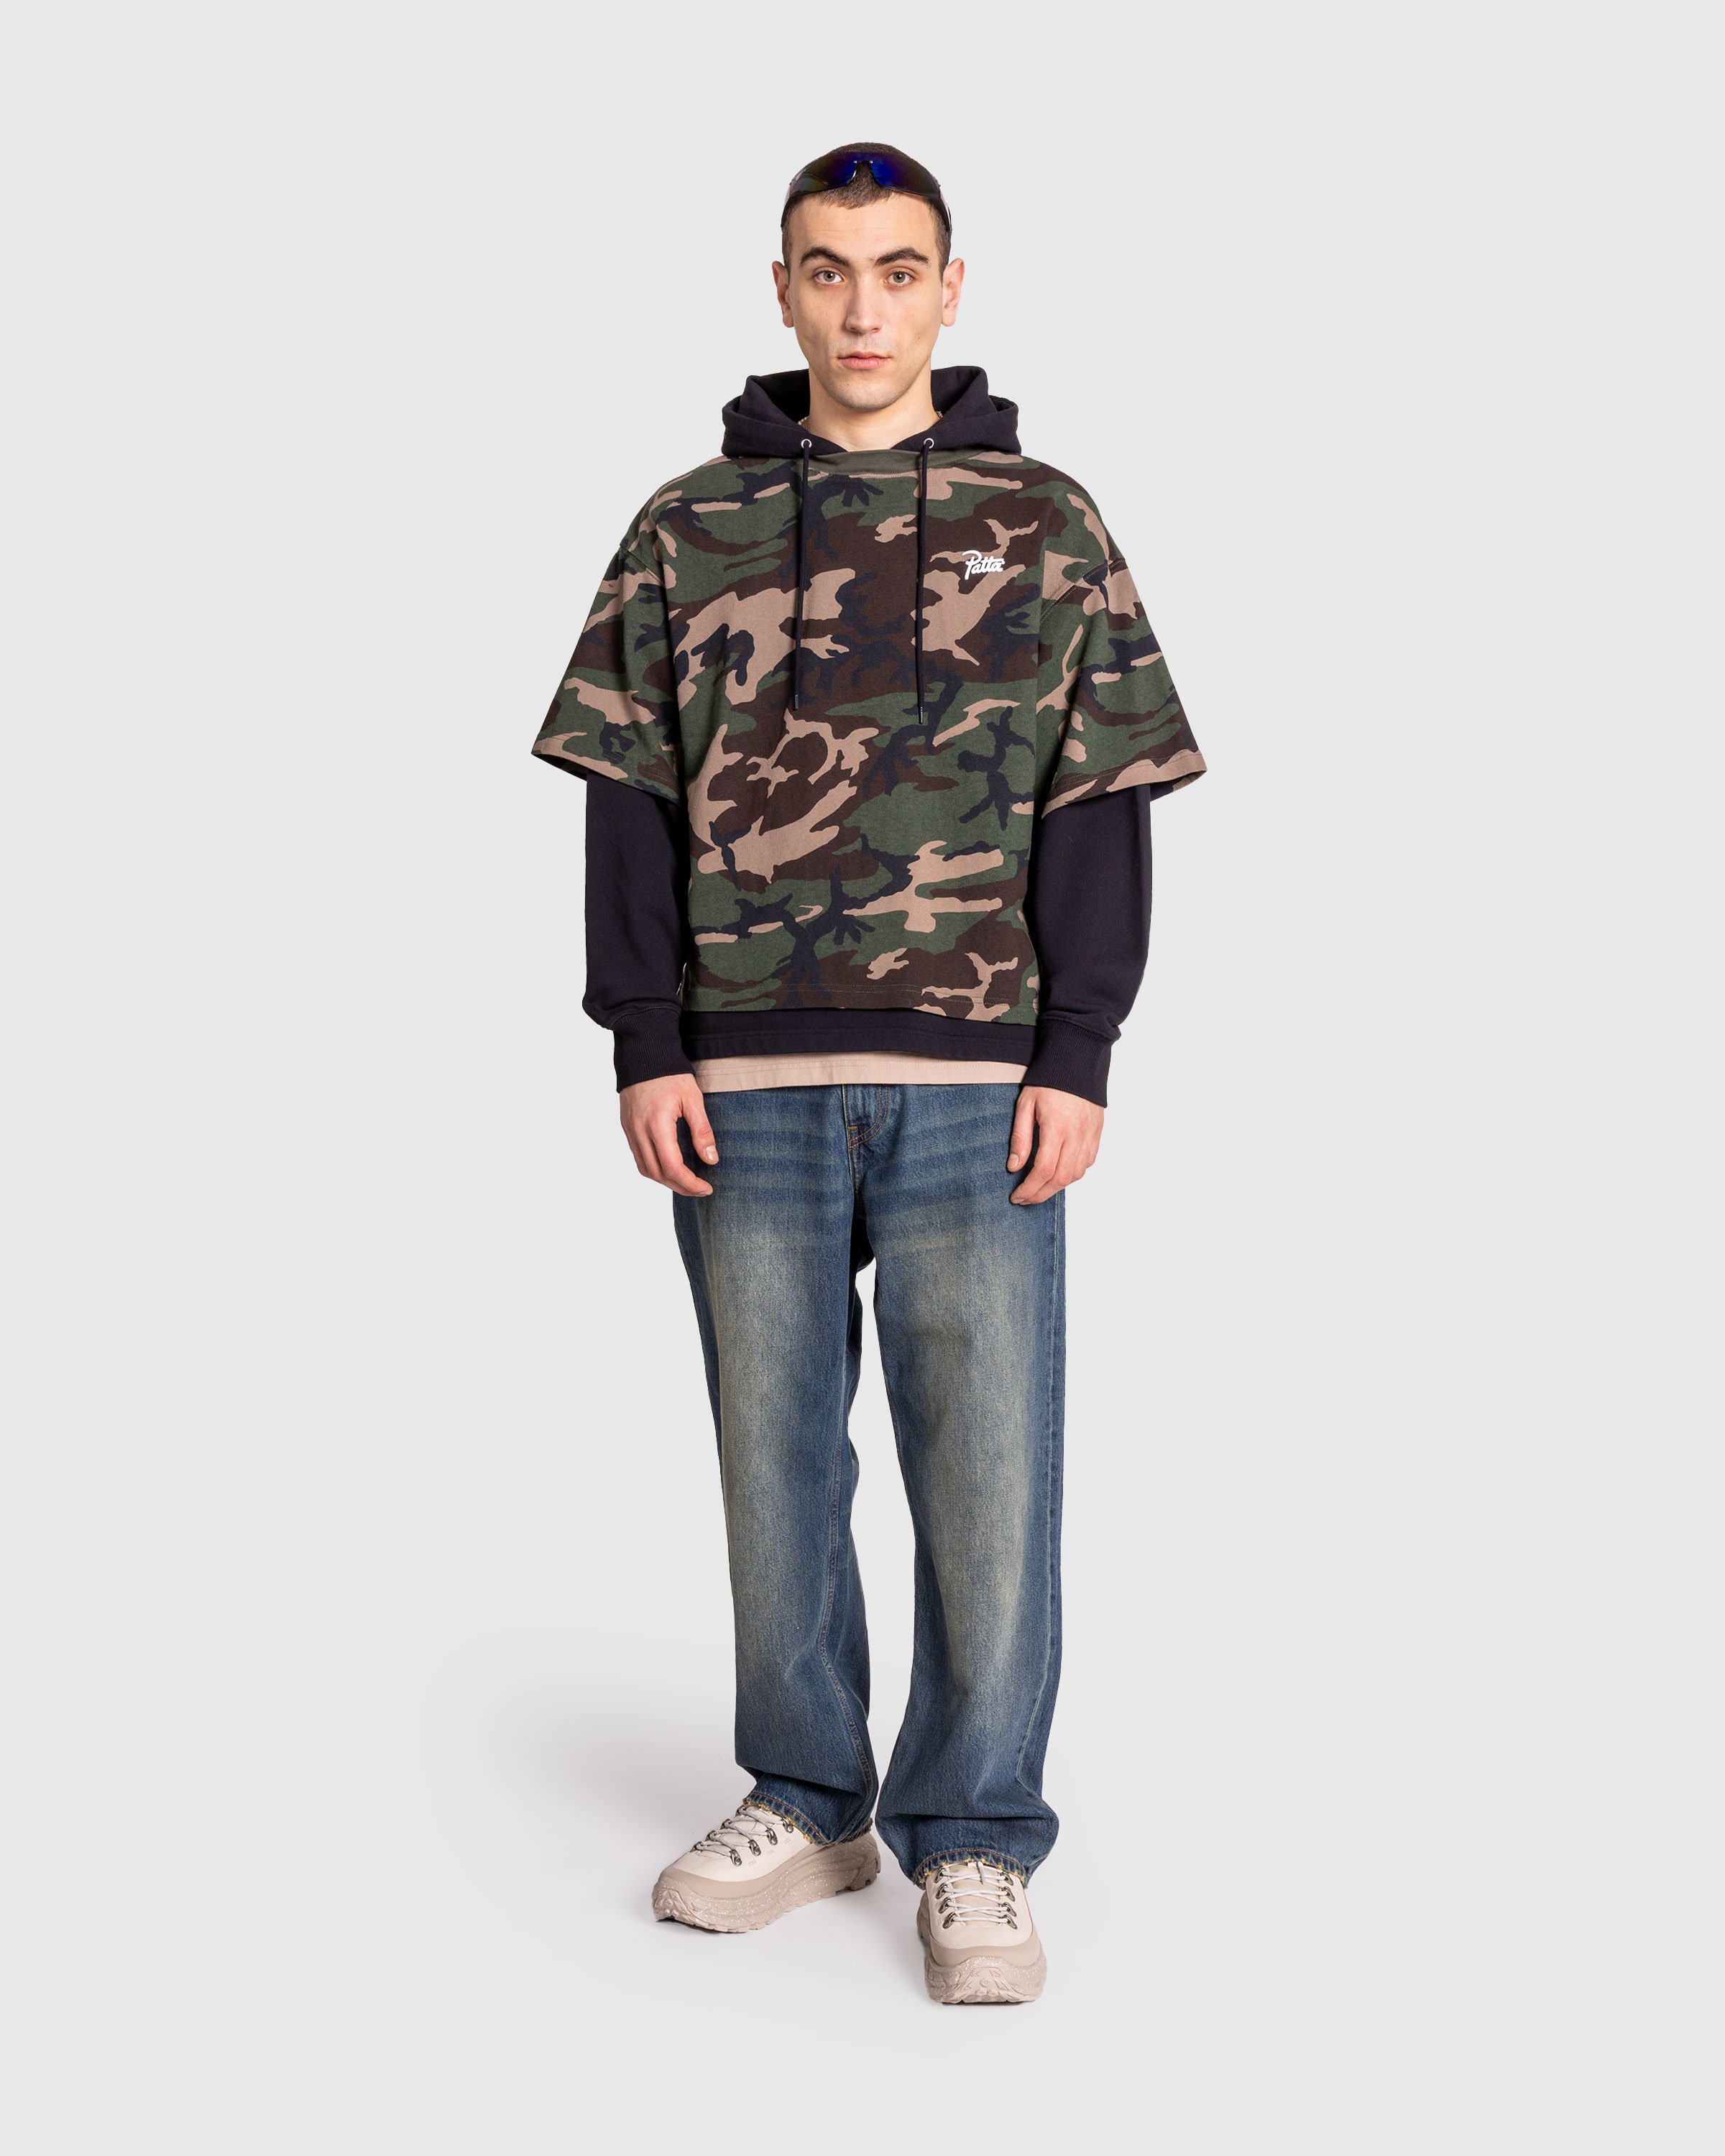 Patta - Always On Top Hooded Sweater Multi - Clothing - Multi - Image 3